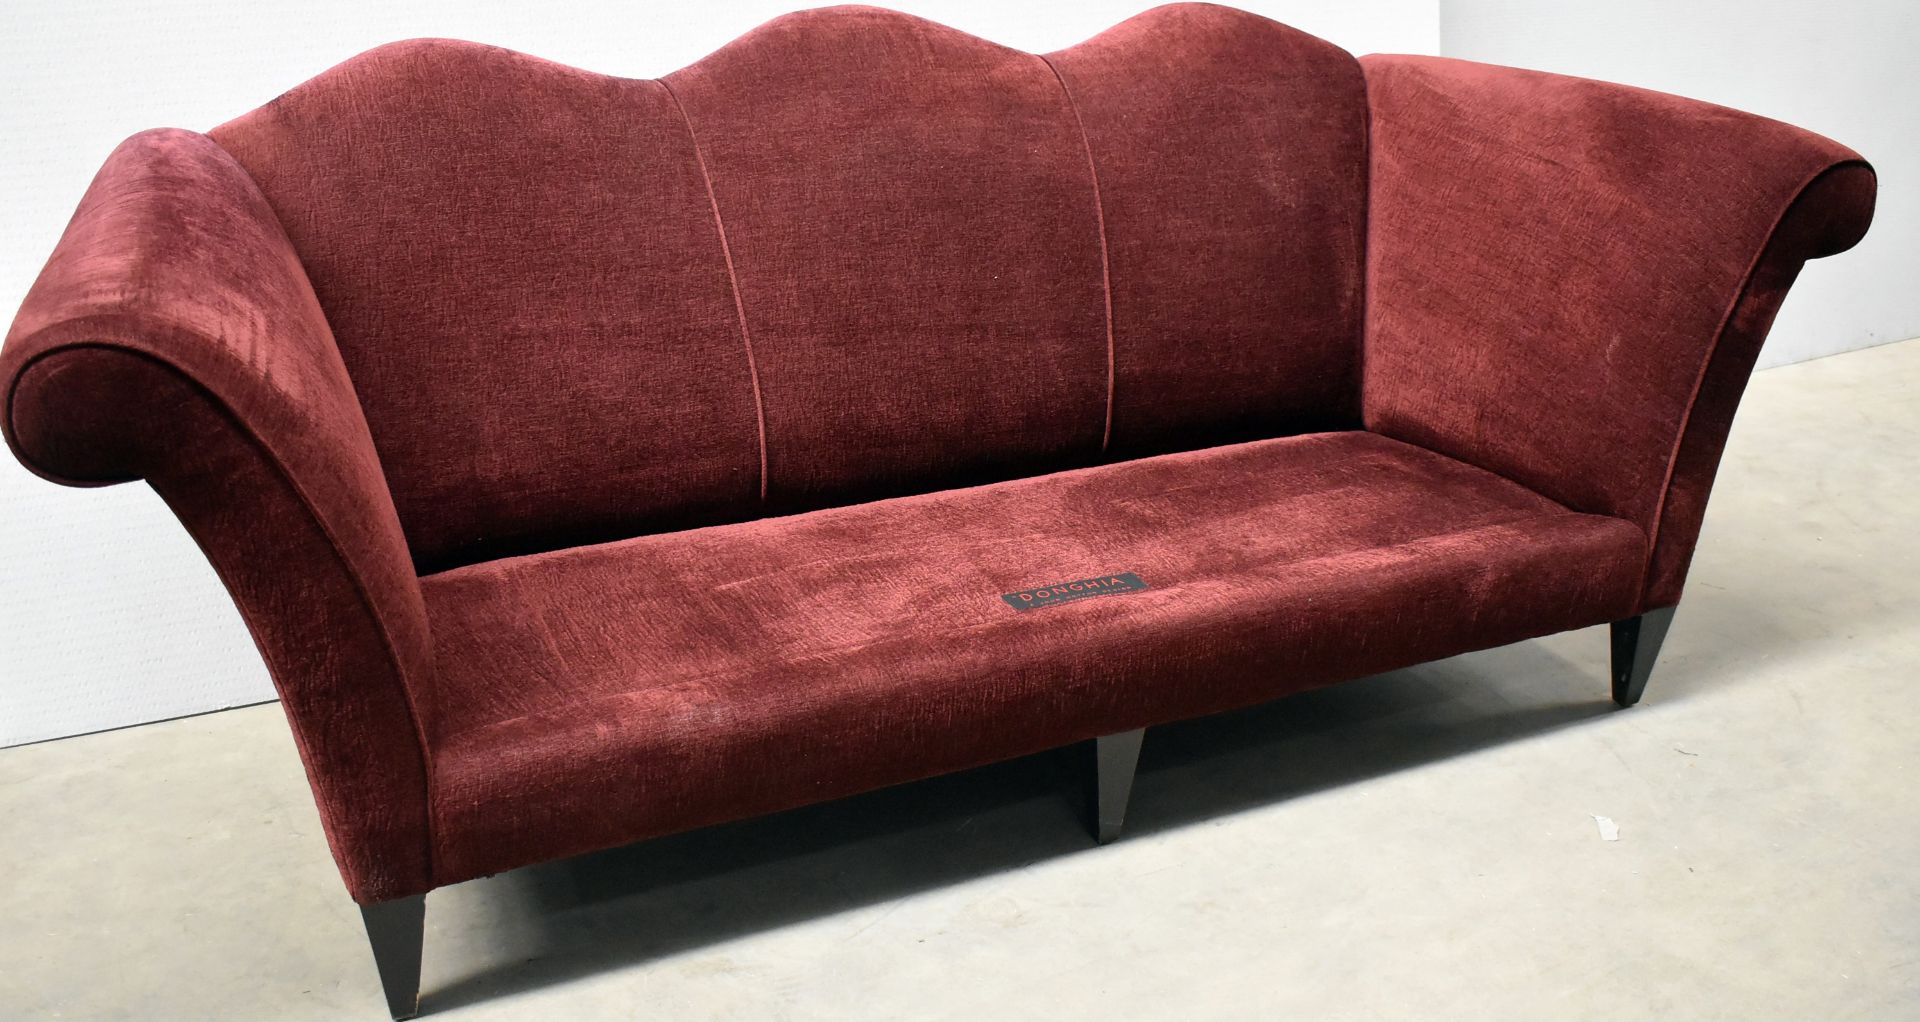 1 x DONGHIA John Hutton Red Velvet 3 Seater Sofa With Rolled Arms & Scallop Back & Wooden Legs - Image 7 of 9